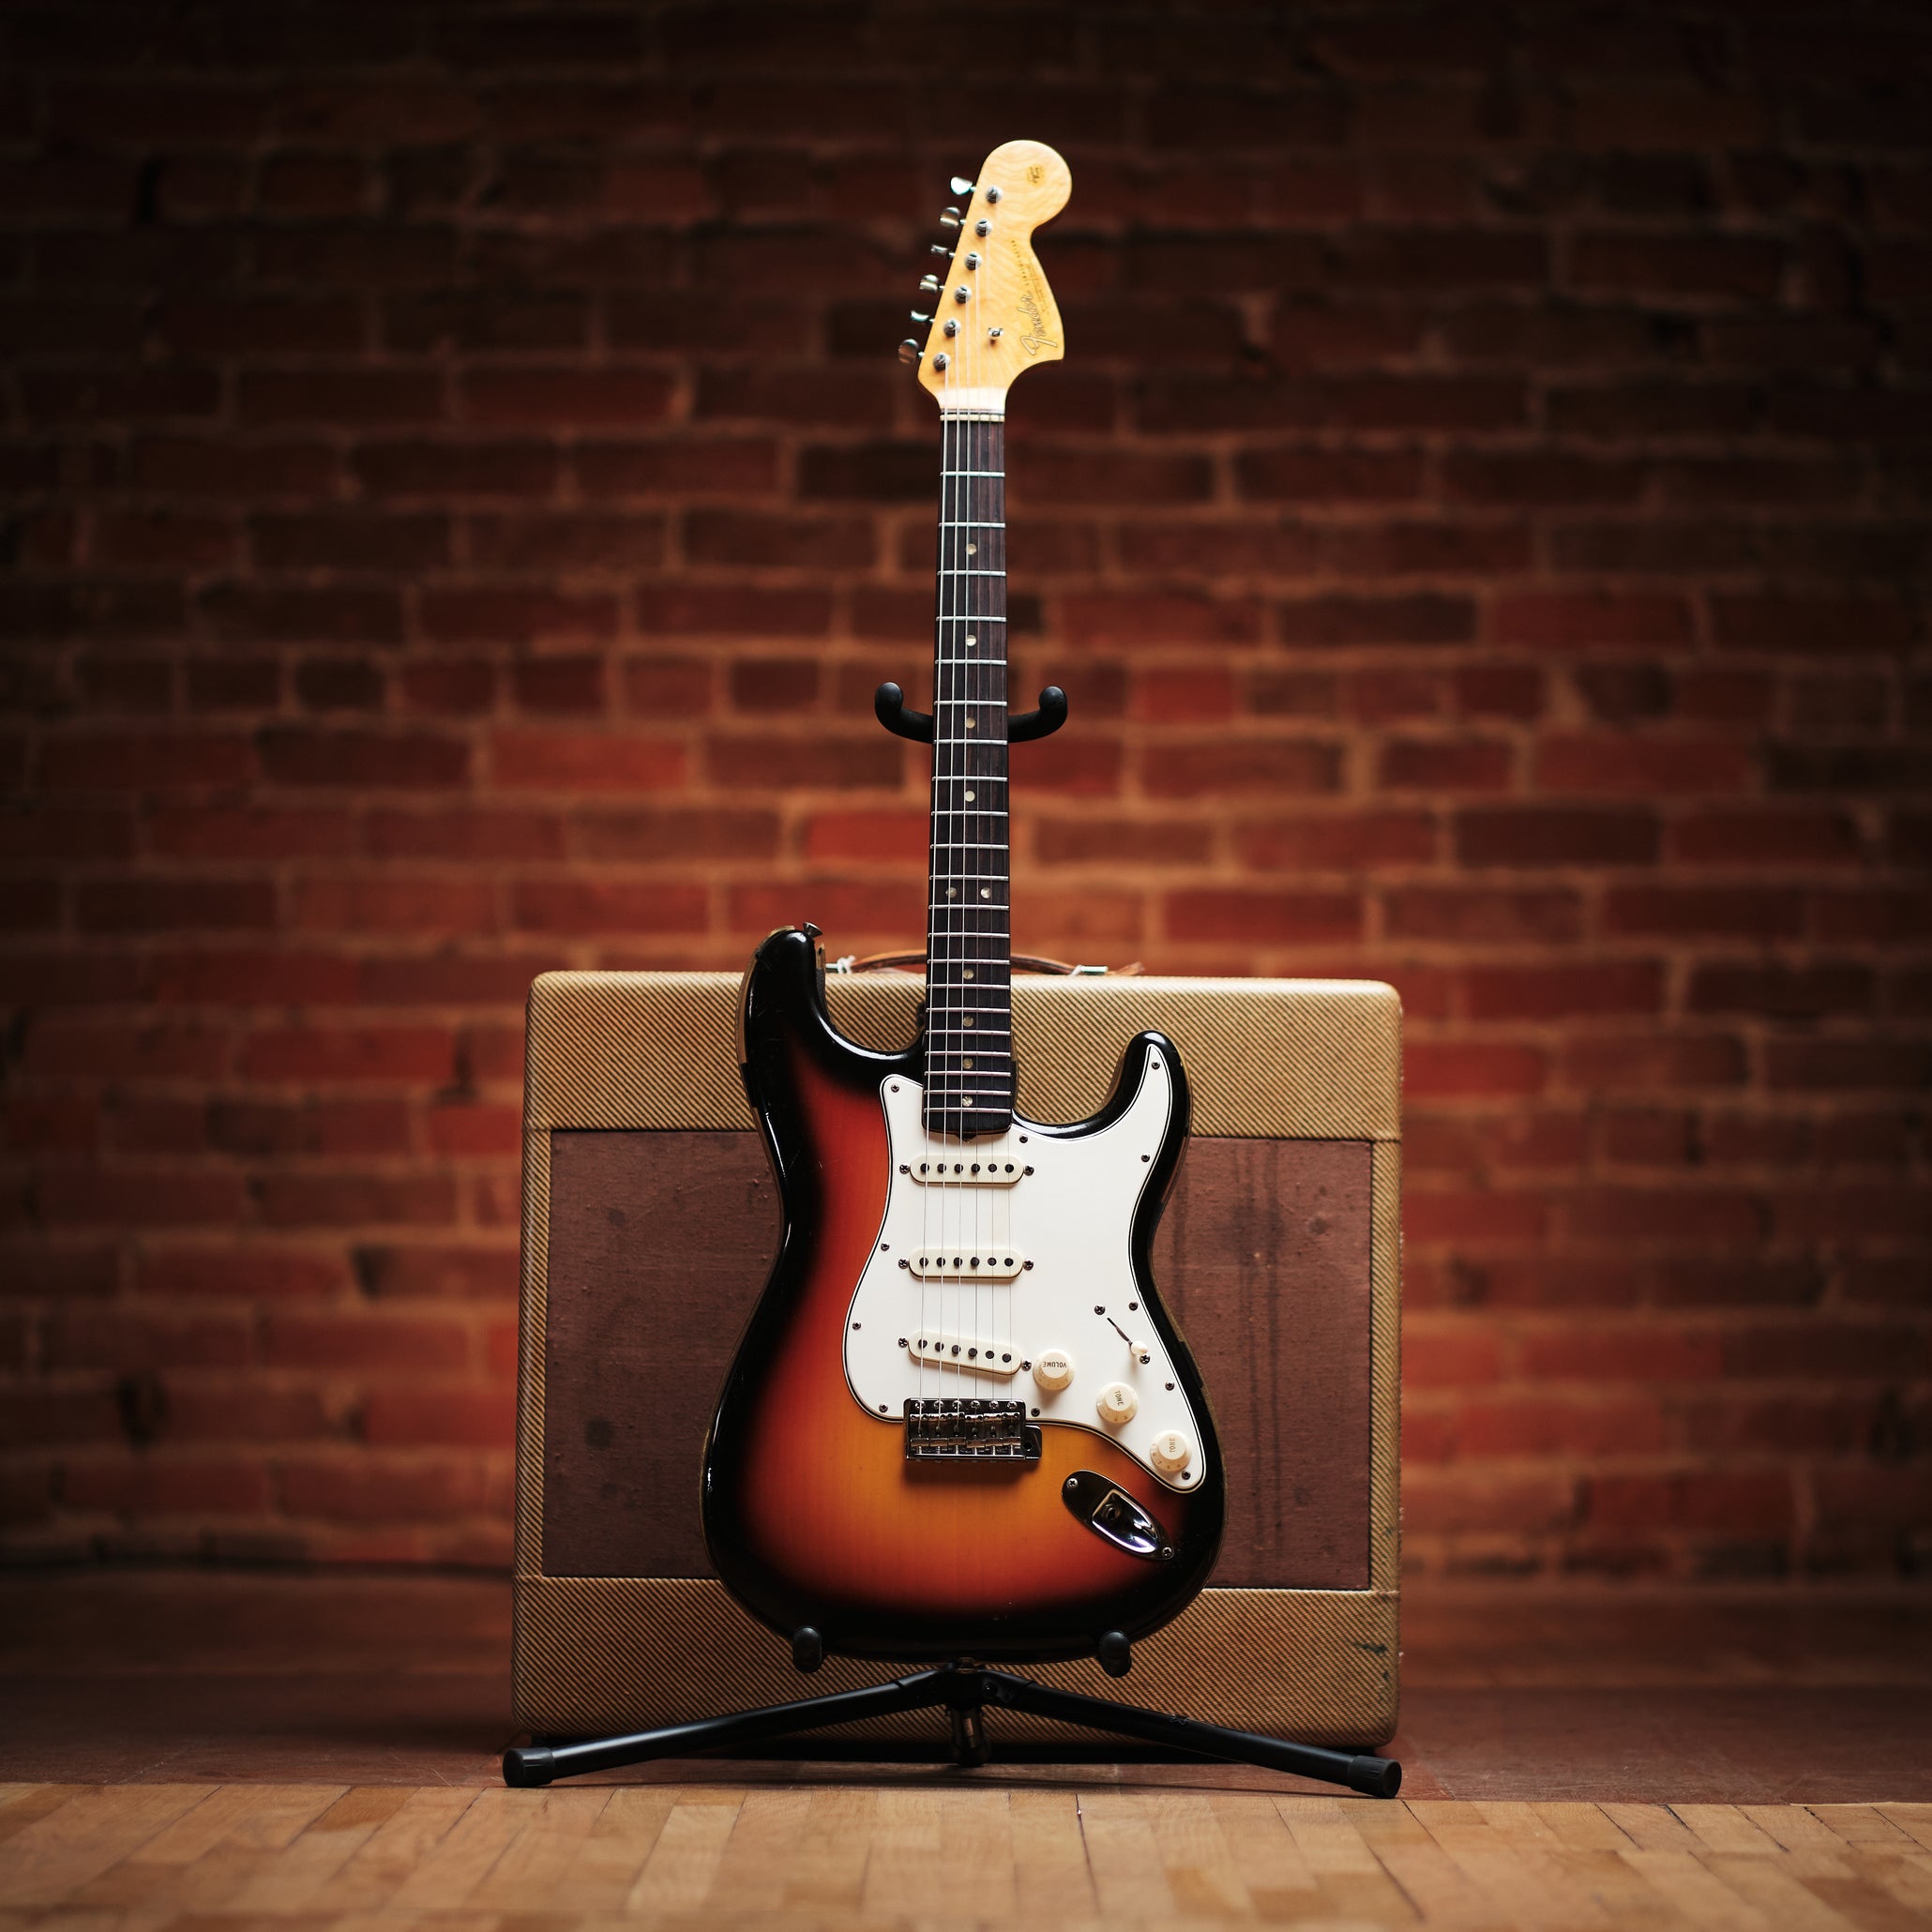 Fender Guitar Photos, Download The BEST Free Fender Guitar Stock Photos &  HD Images